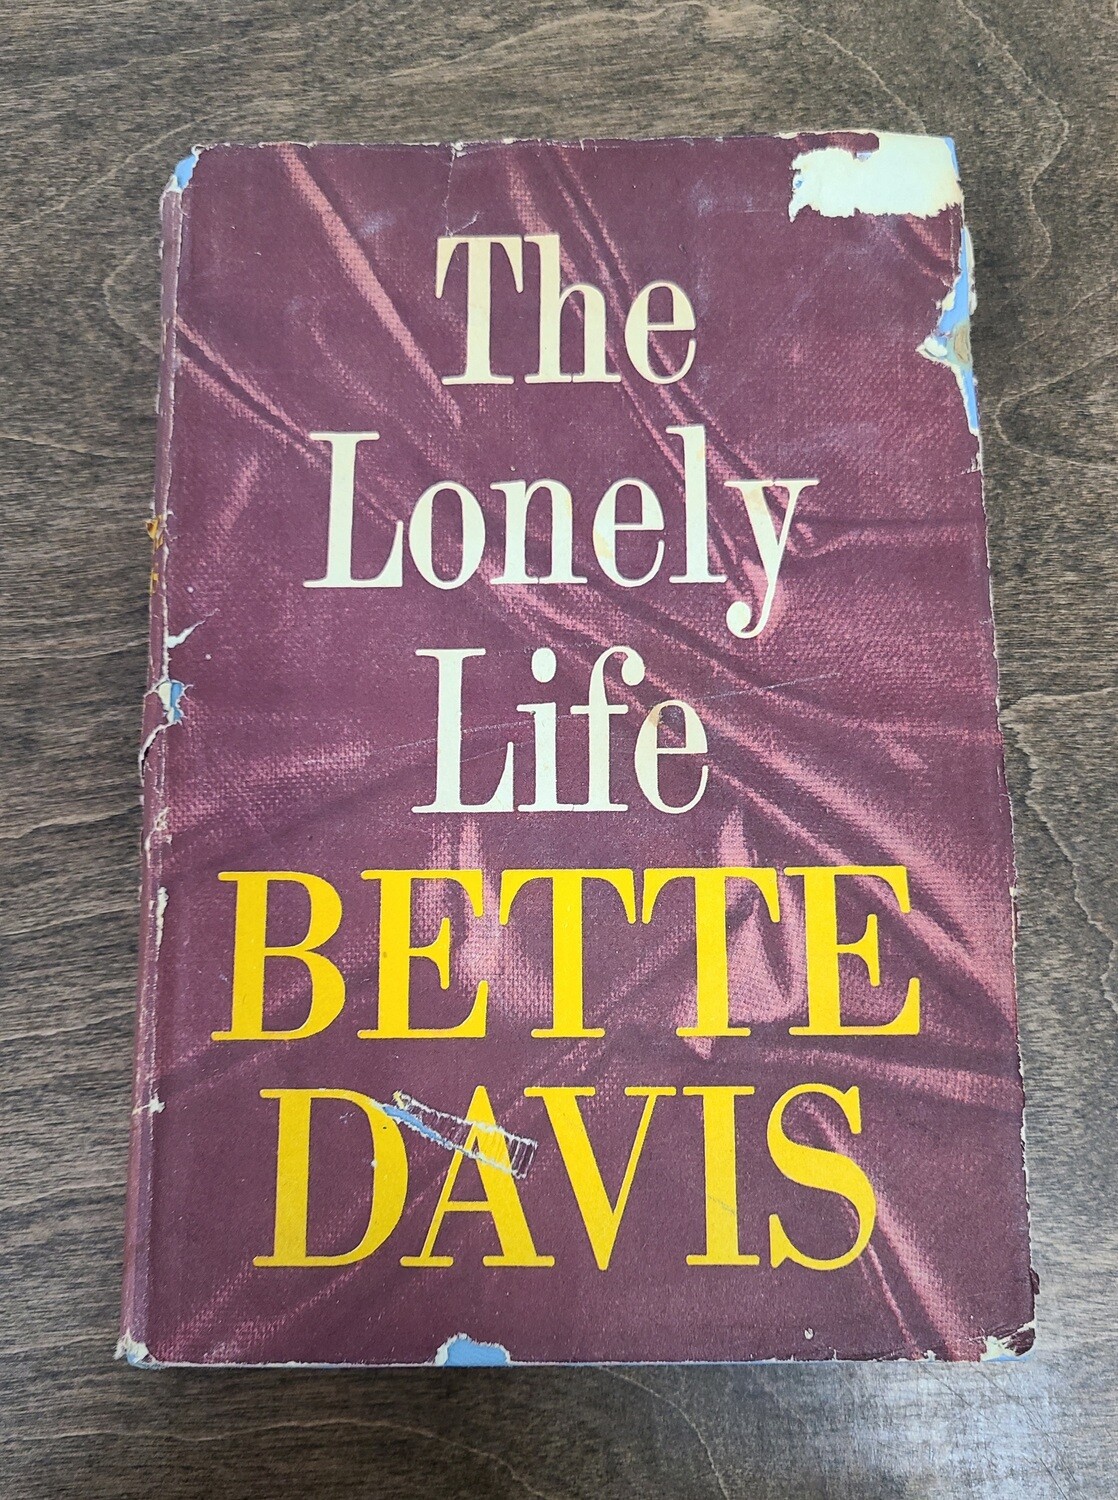 The Lonely Life by Bette Davis